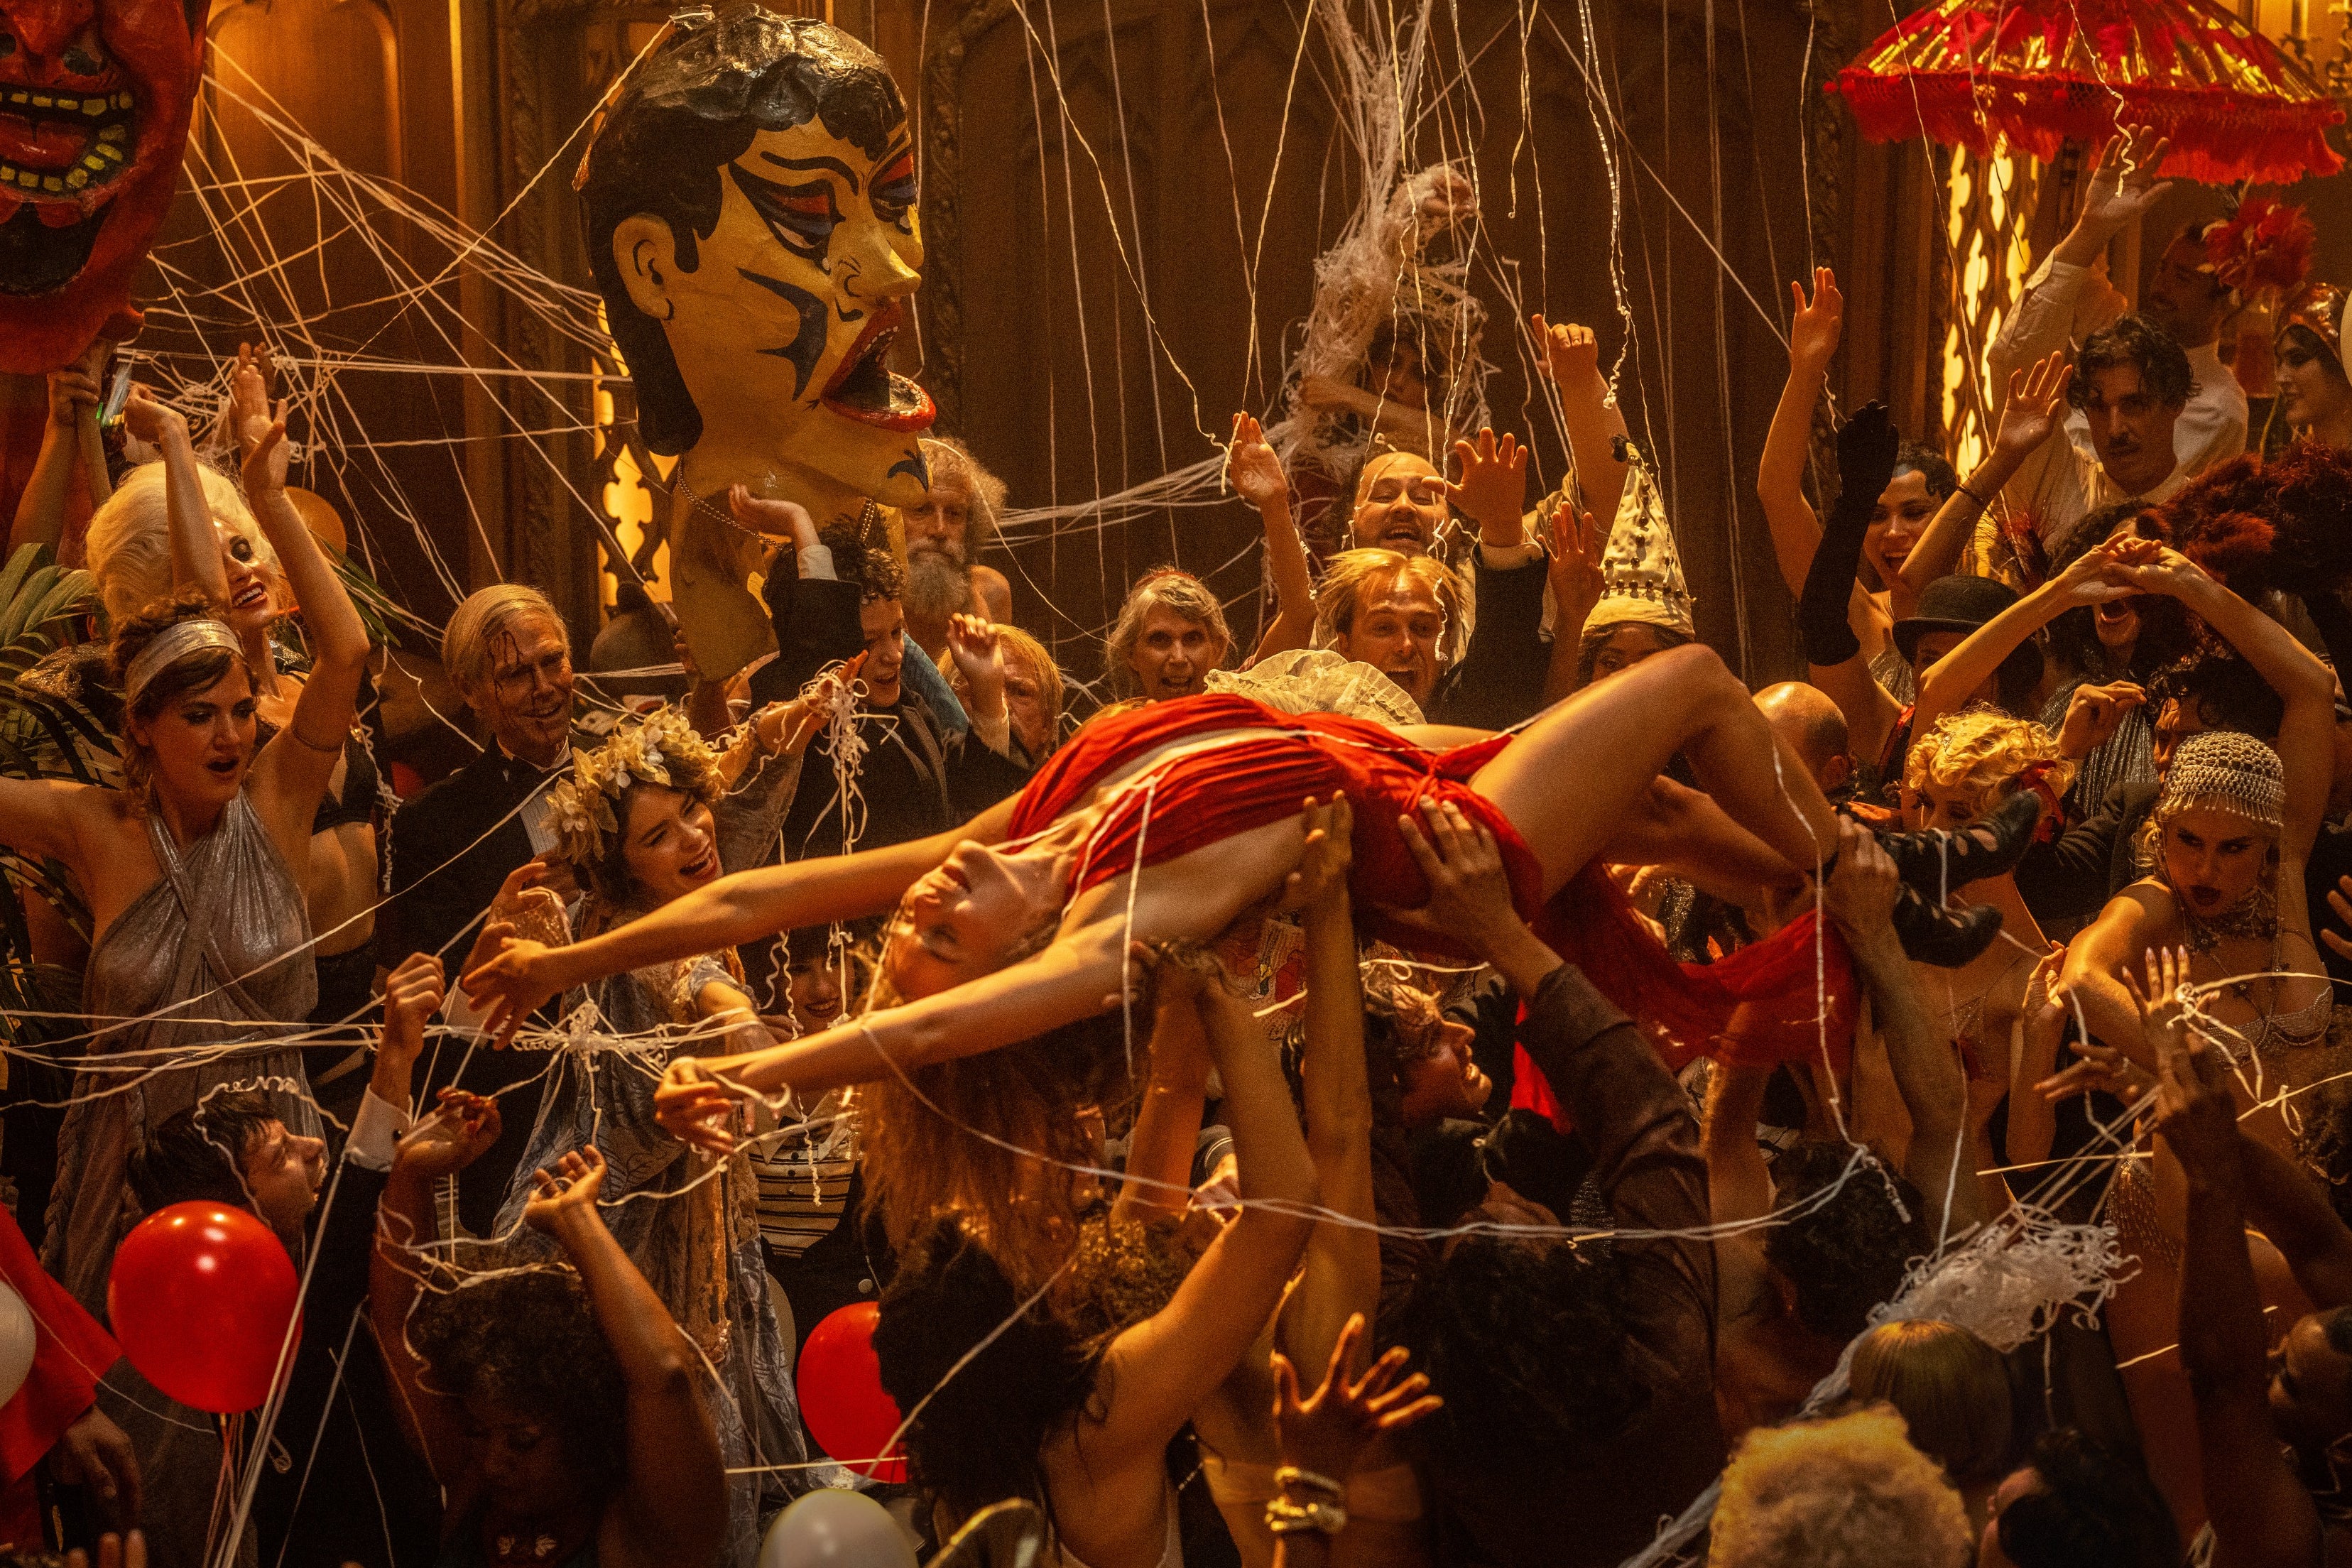 Margot Robbie lies back ecstatic in a barely-there red dress as she crowdsurfs on a crowd full of debaucherous 1920s partygoers